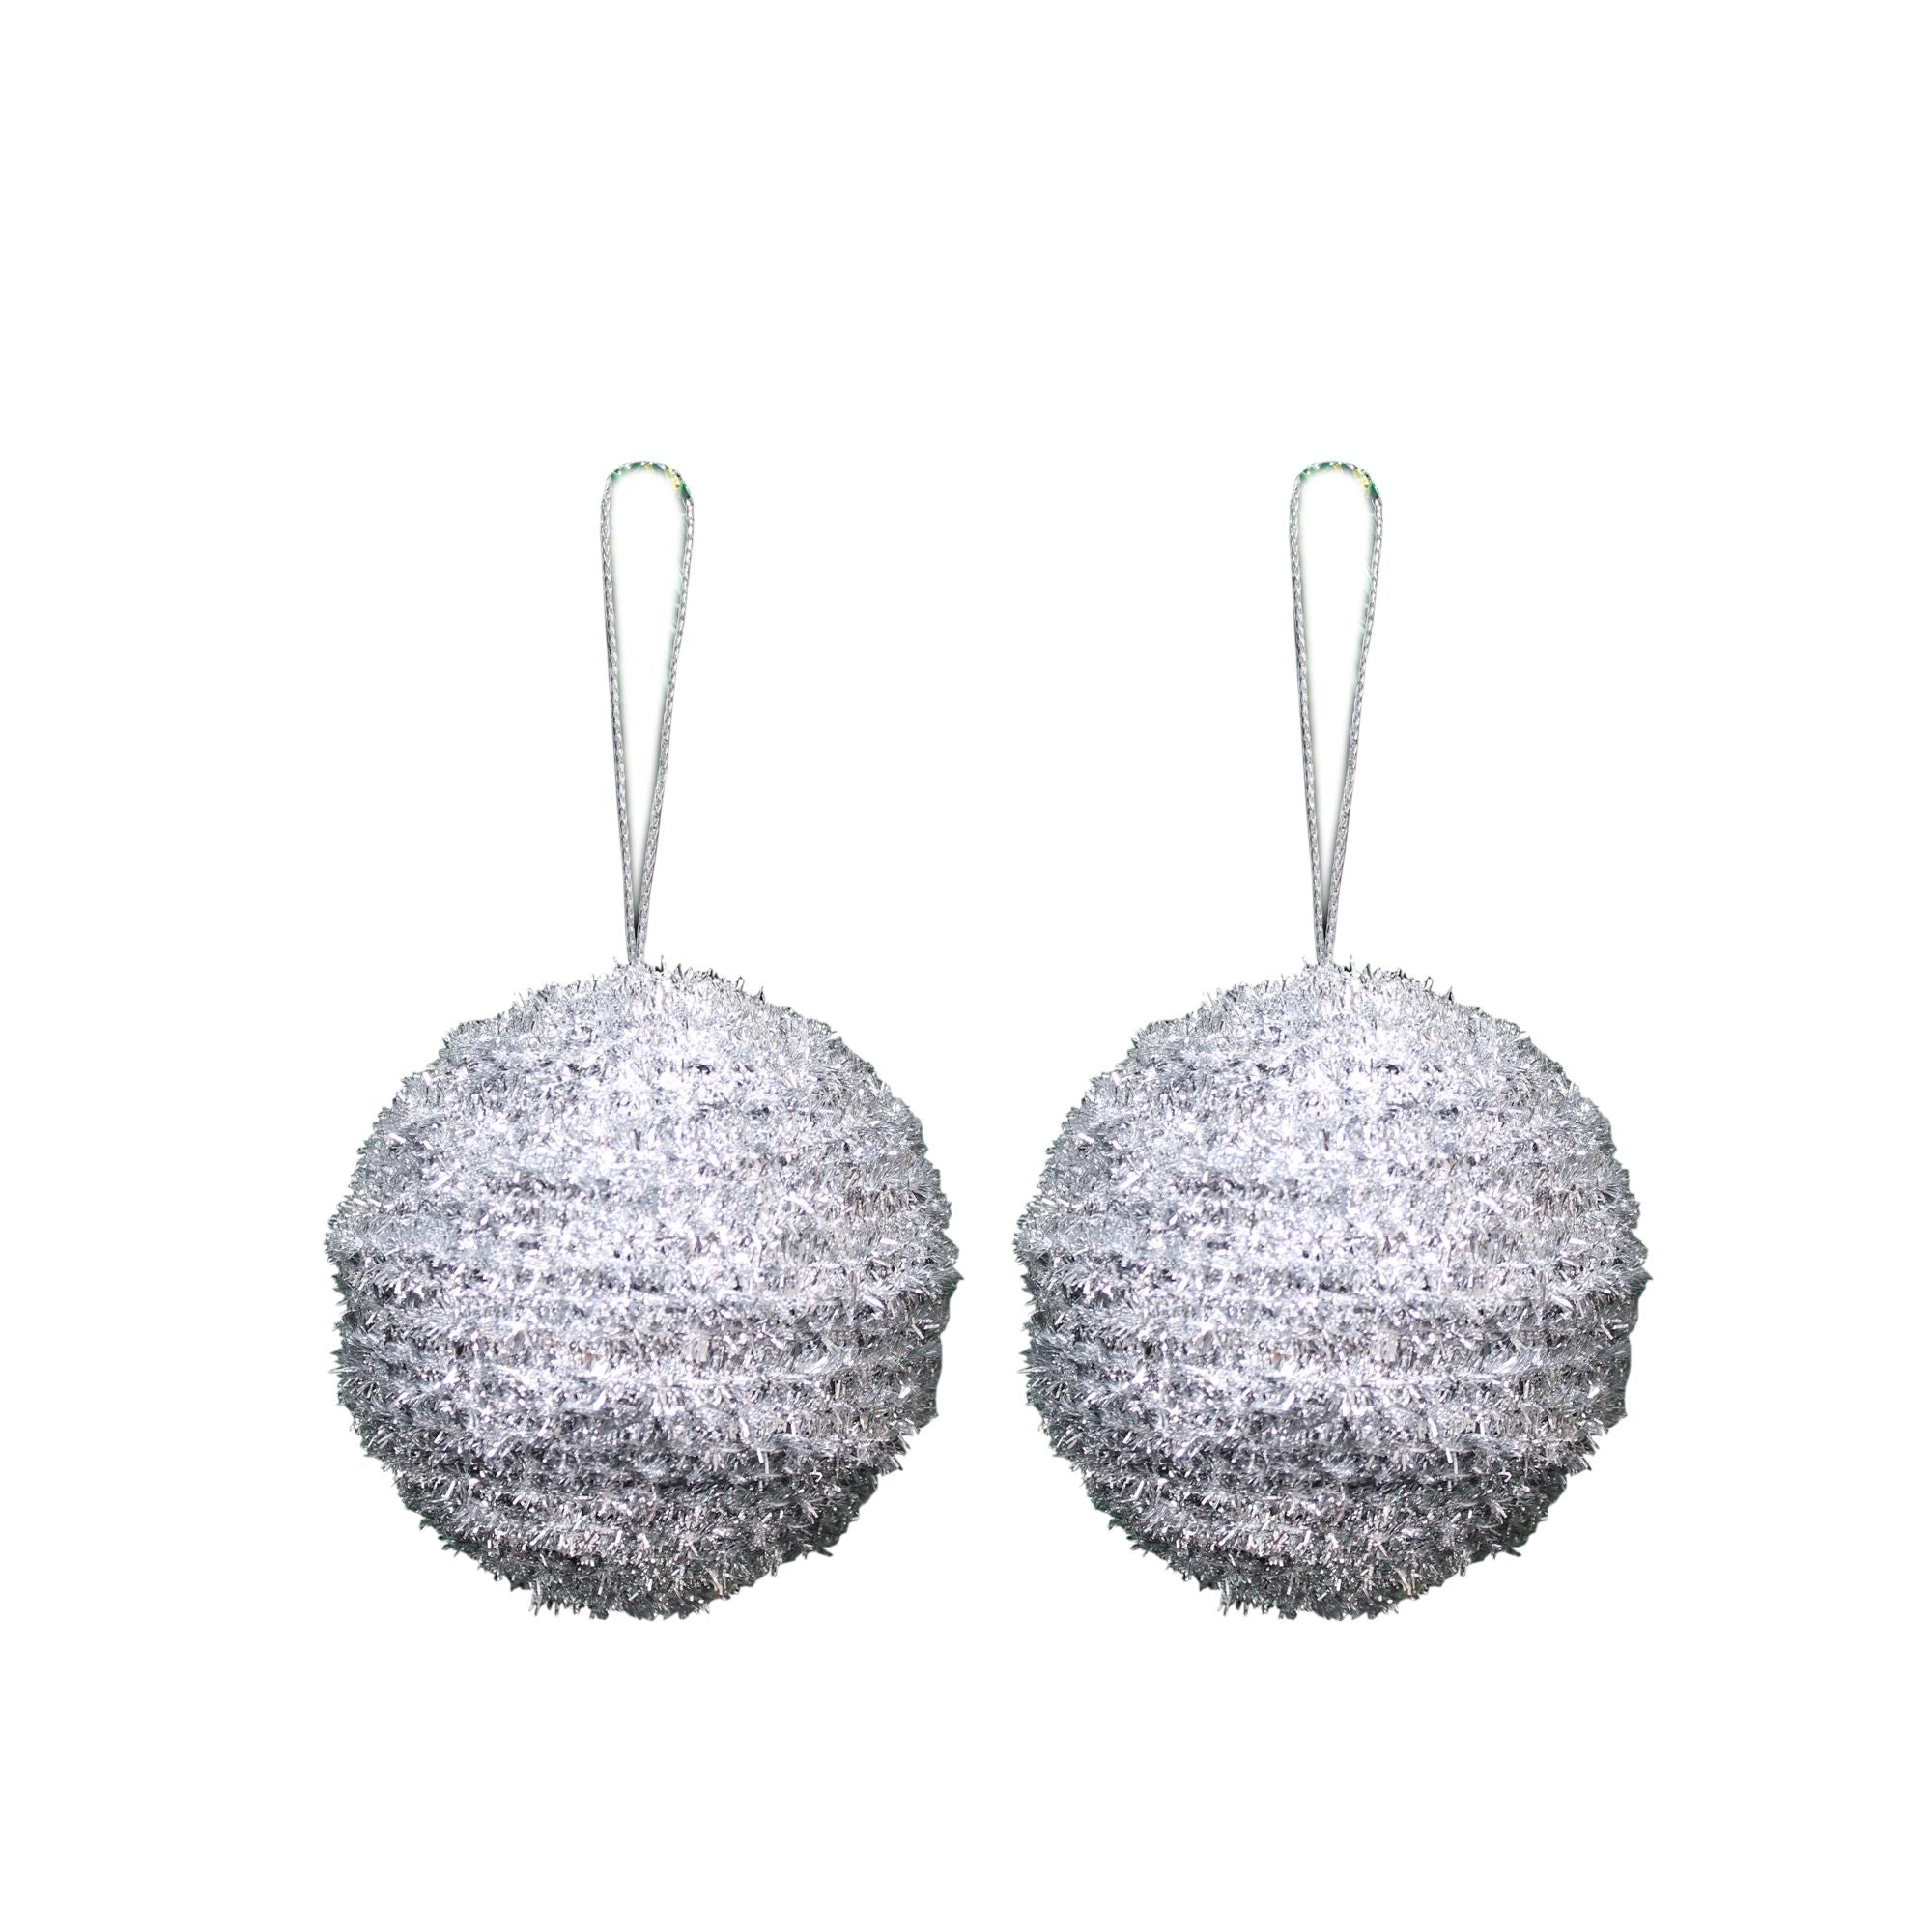 Handmade Christmas Ornaments - Tinsel Baubles, 70mm, Silver, 2pc